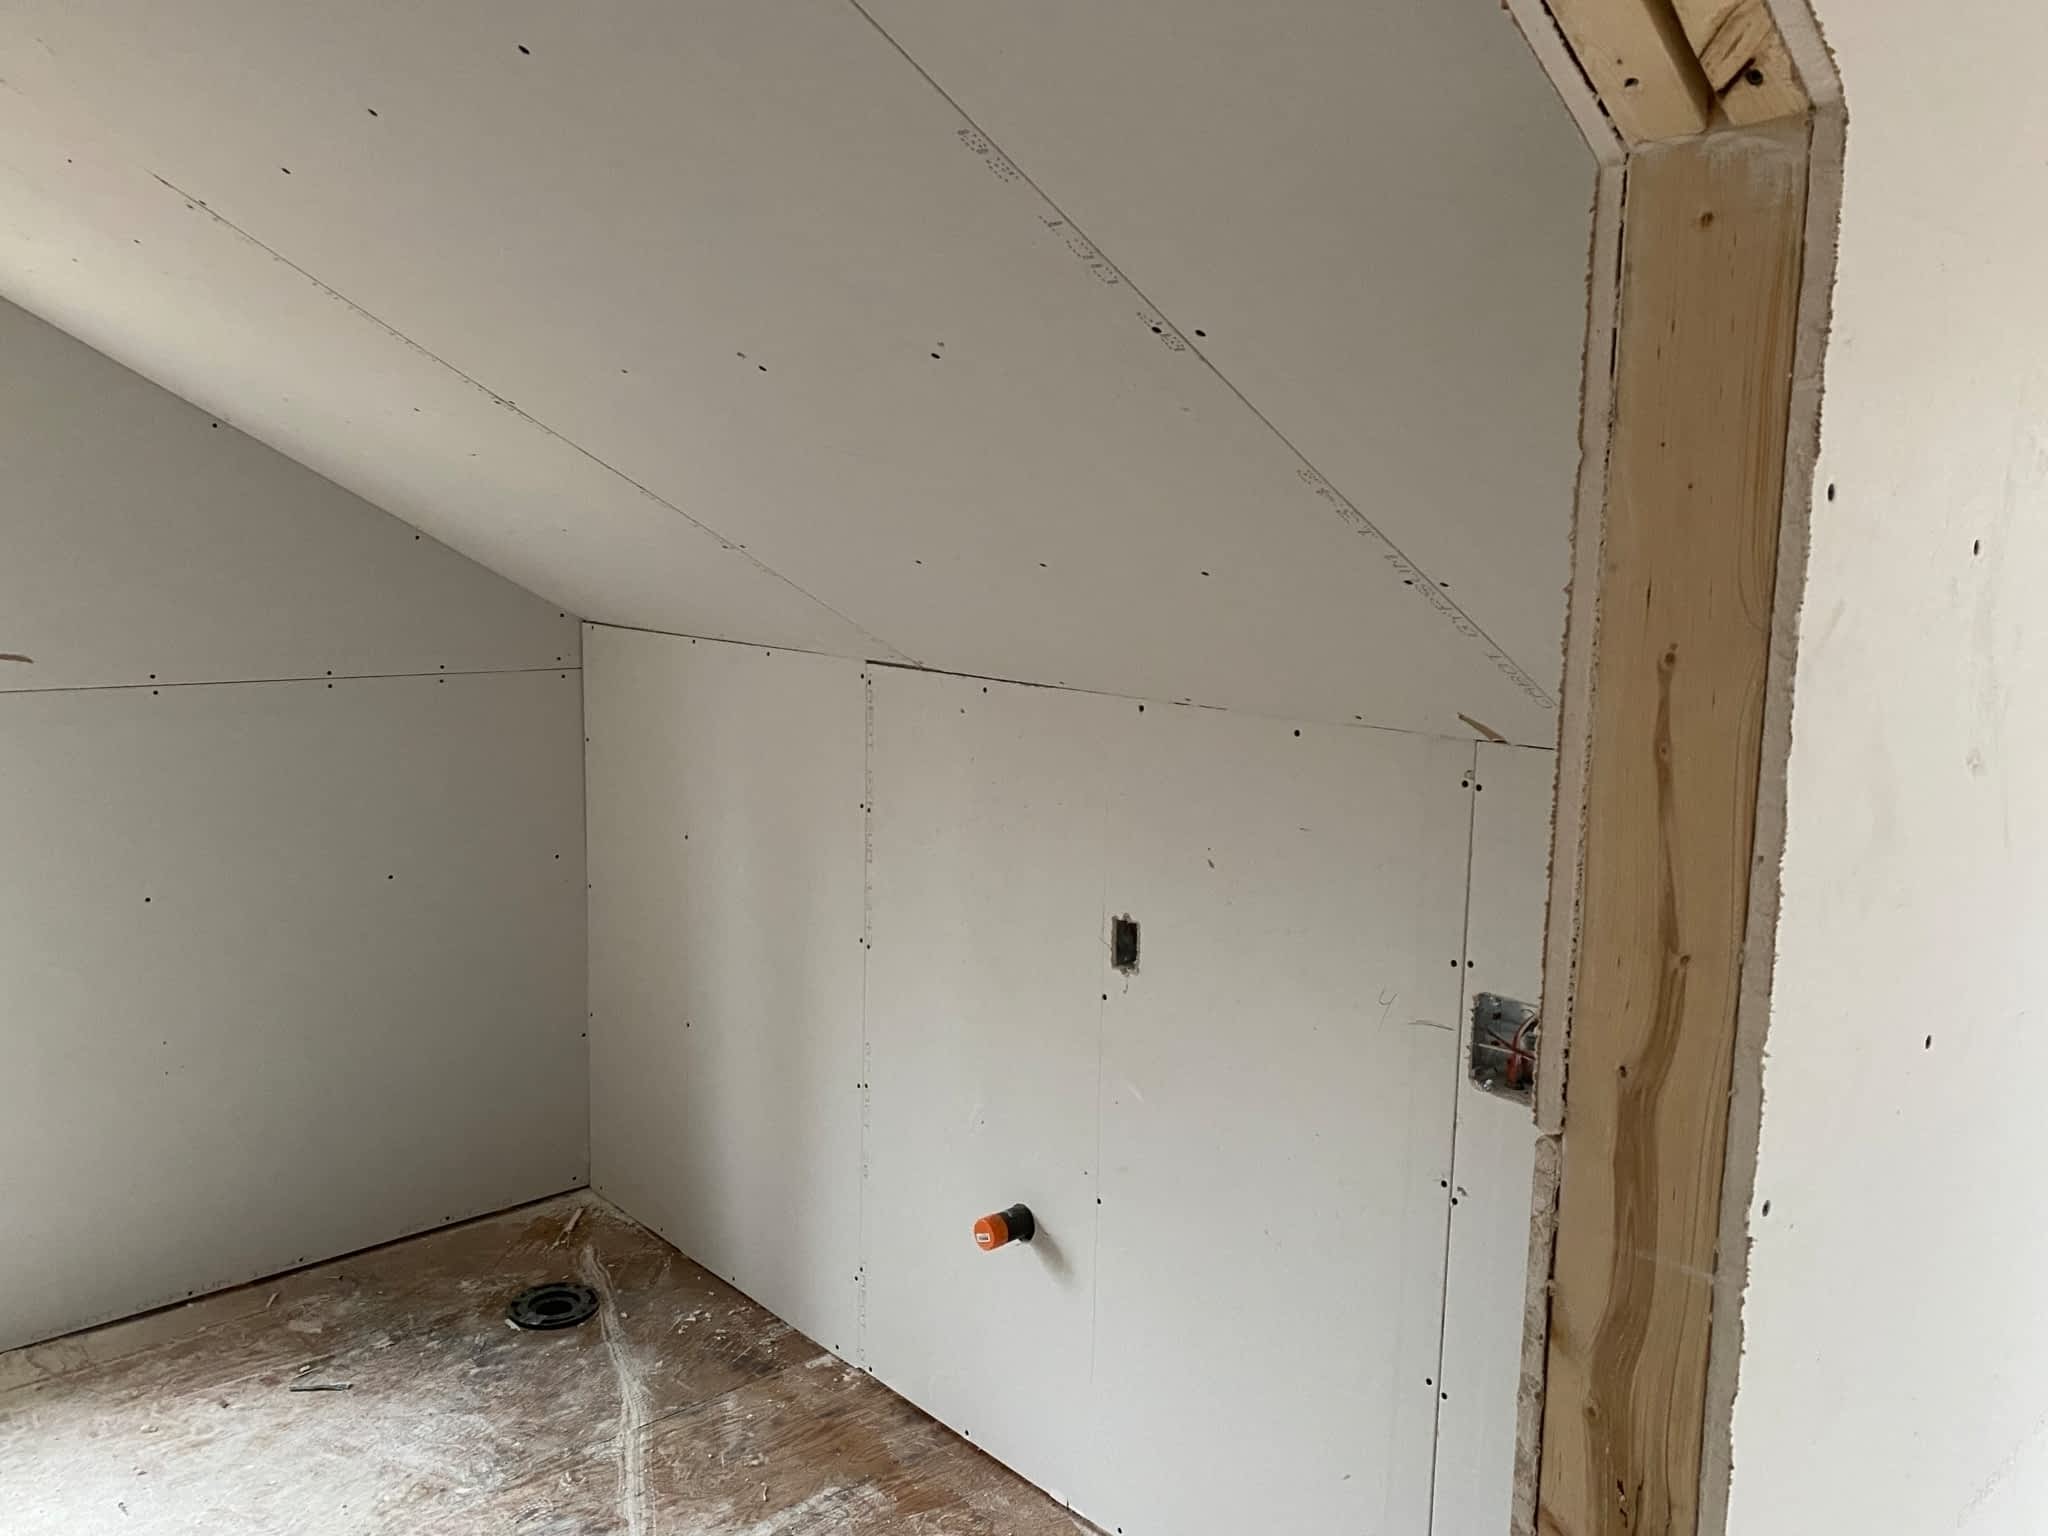 photo Double D's Drywall and Painting